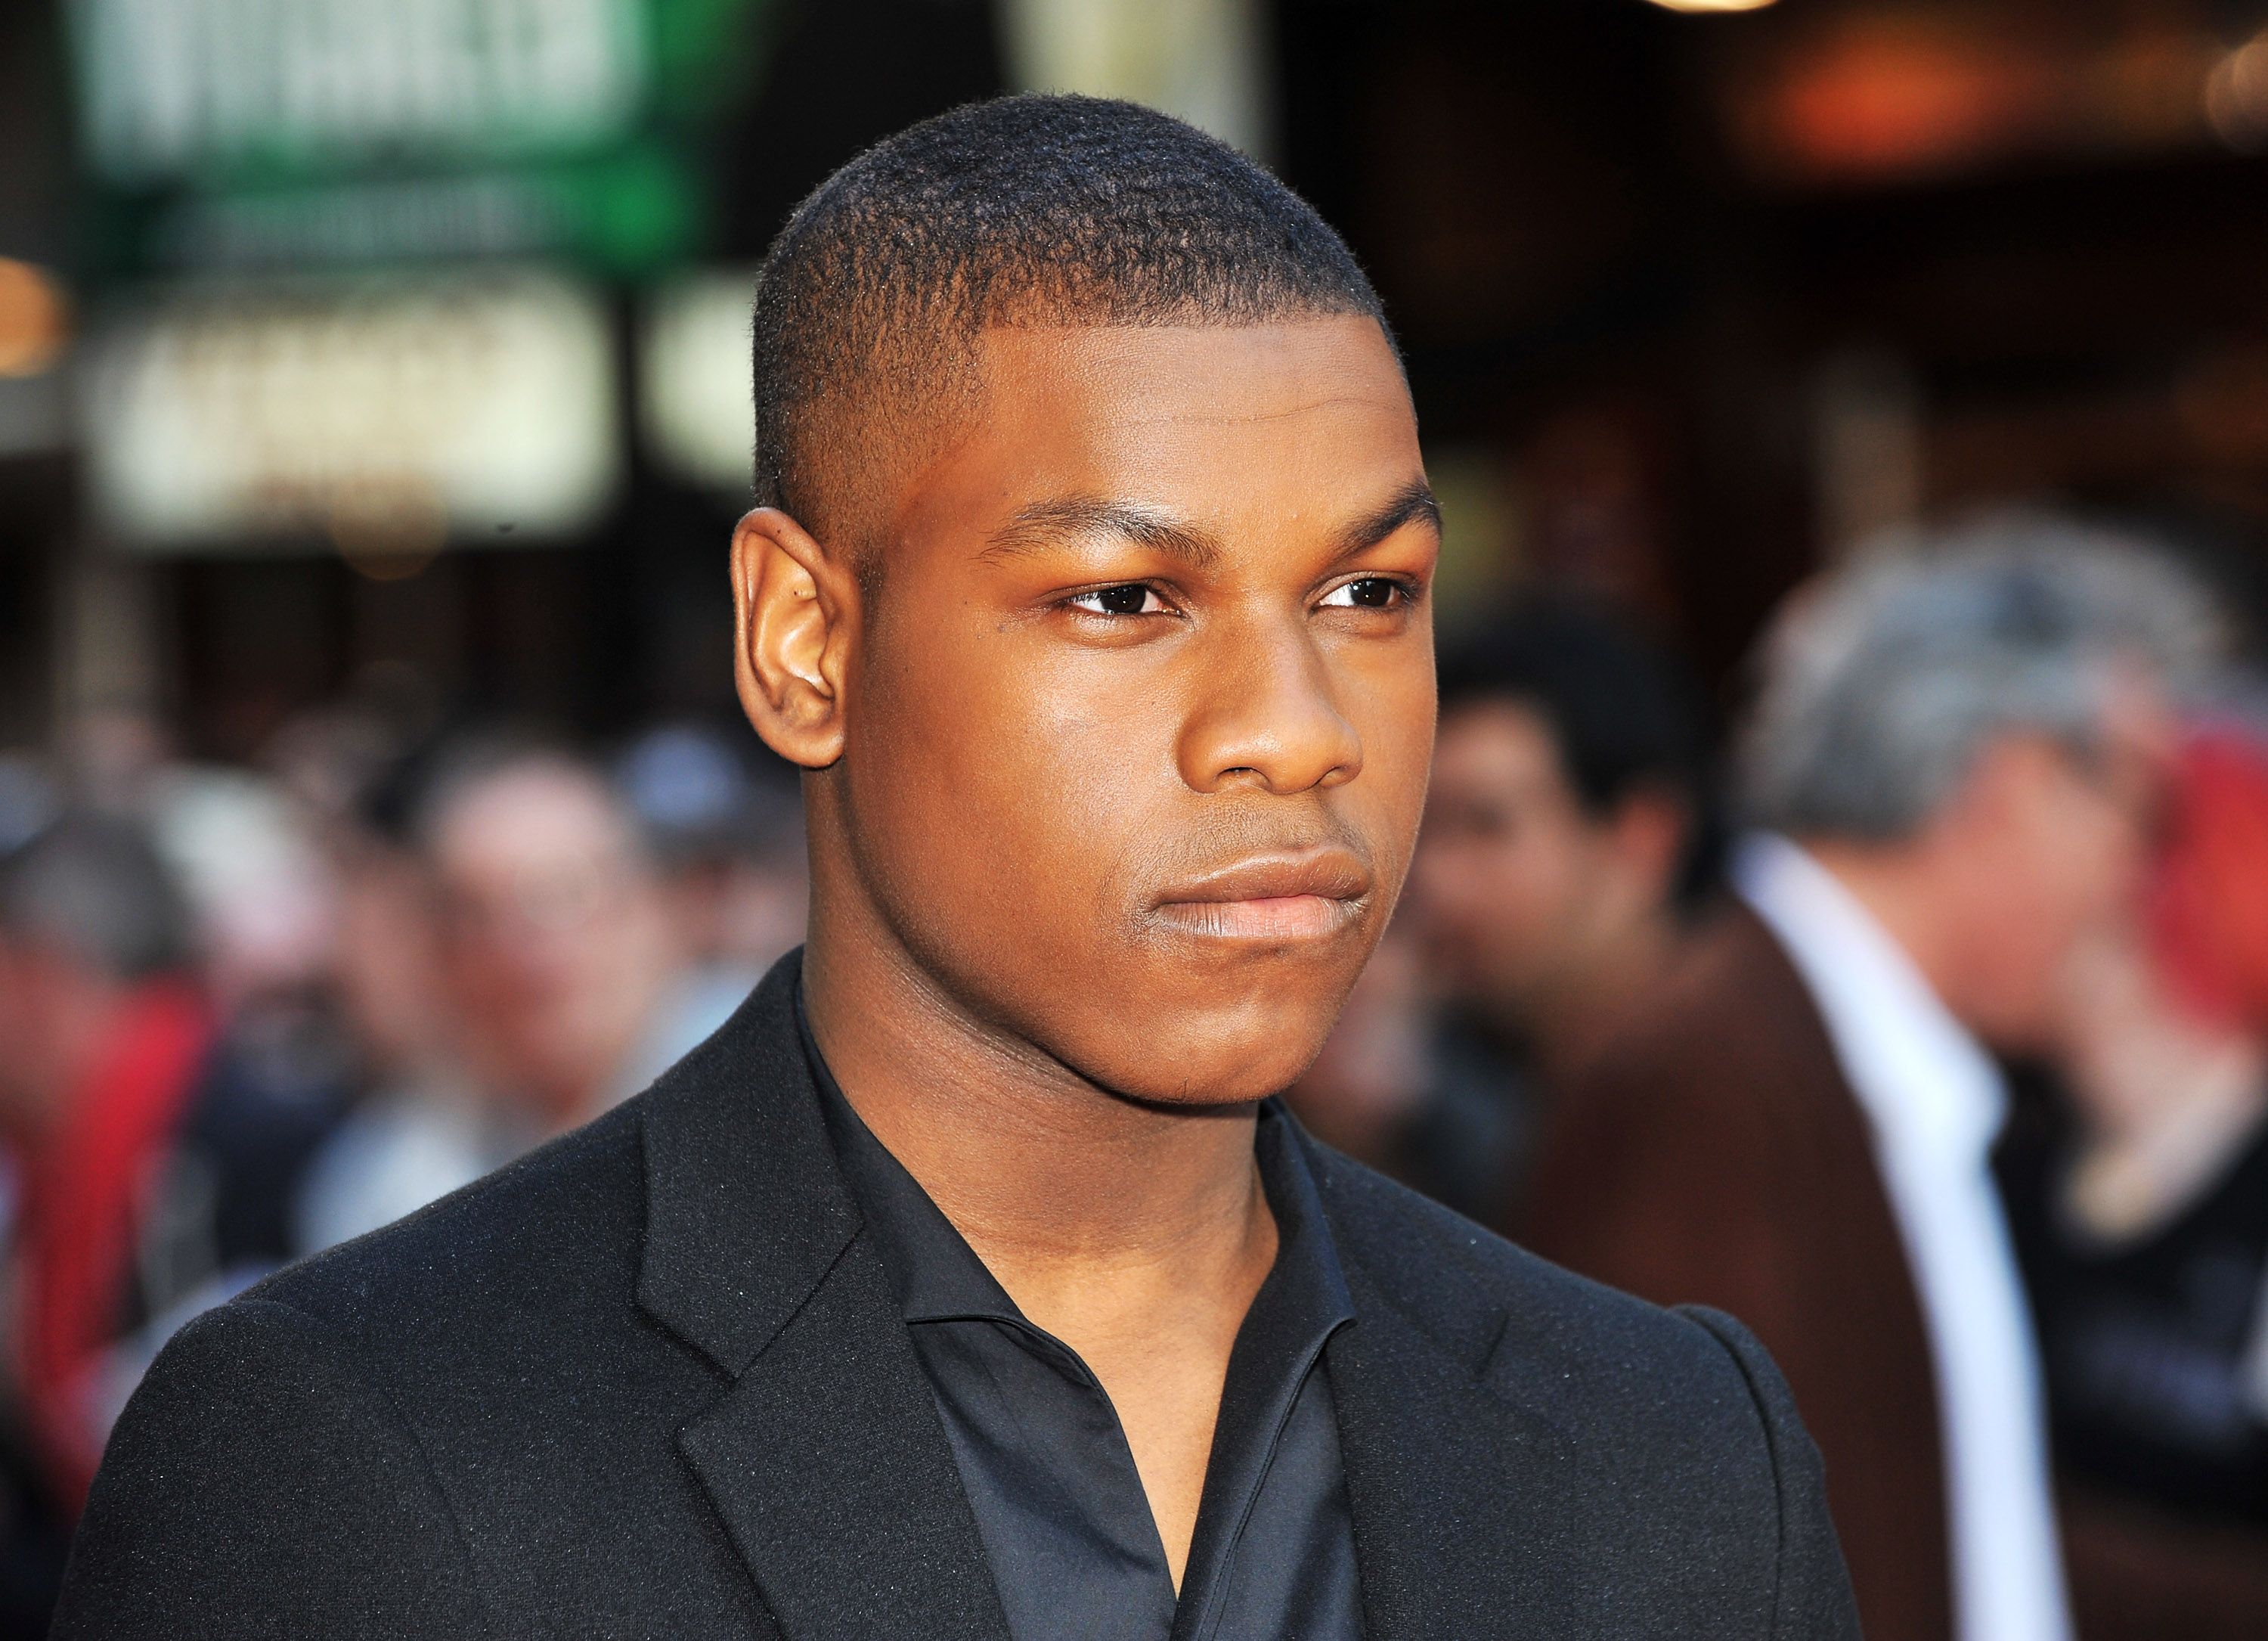 Actor John Boyega at the UK premiere of "Attack the Block" in May 2011. | Source: Getty Images